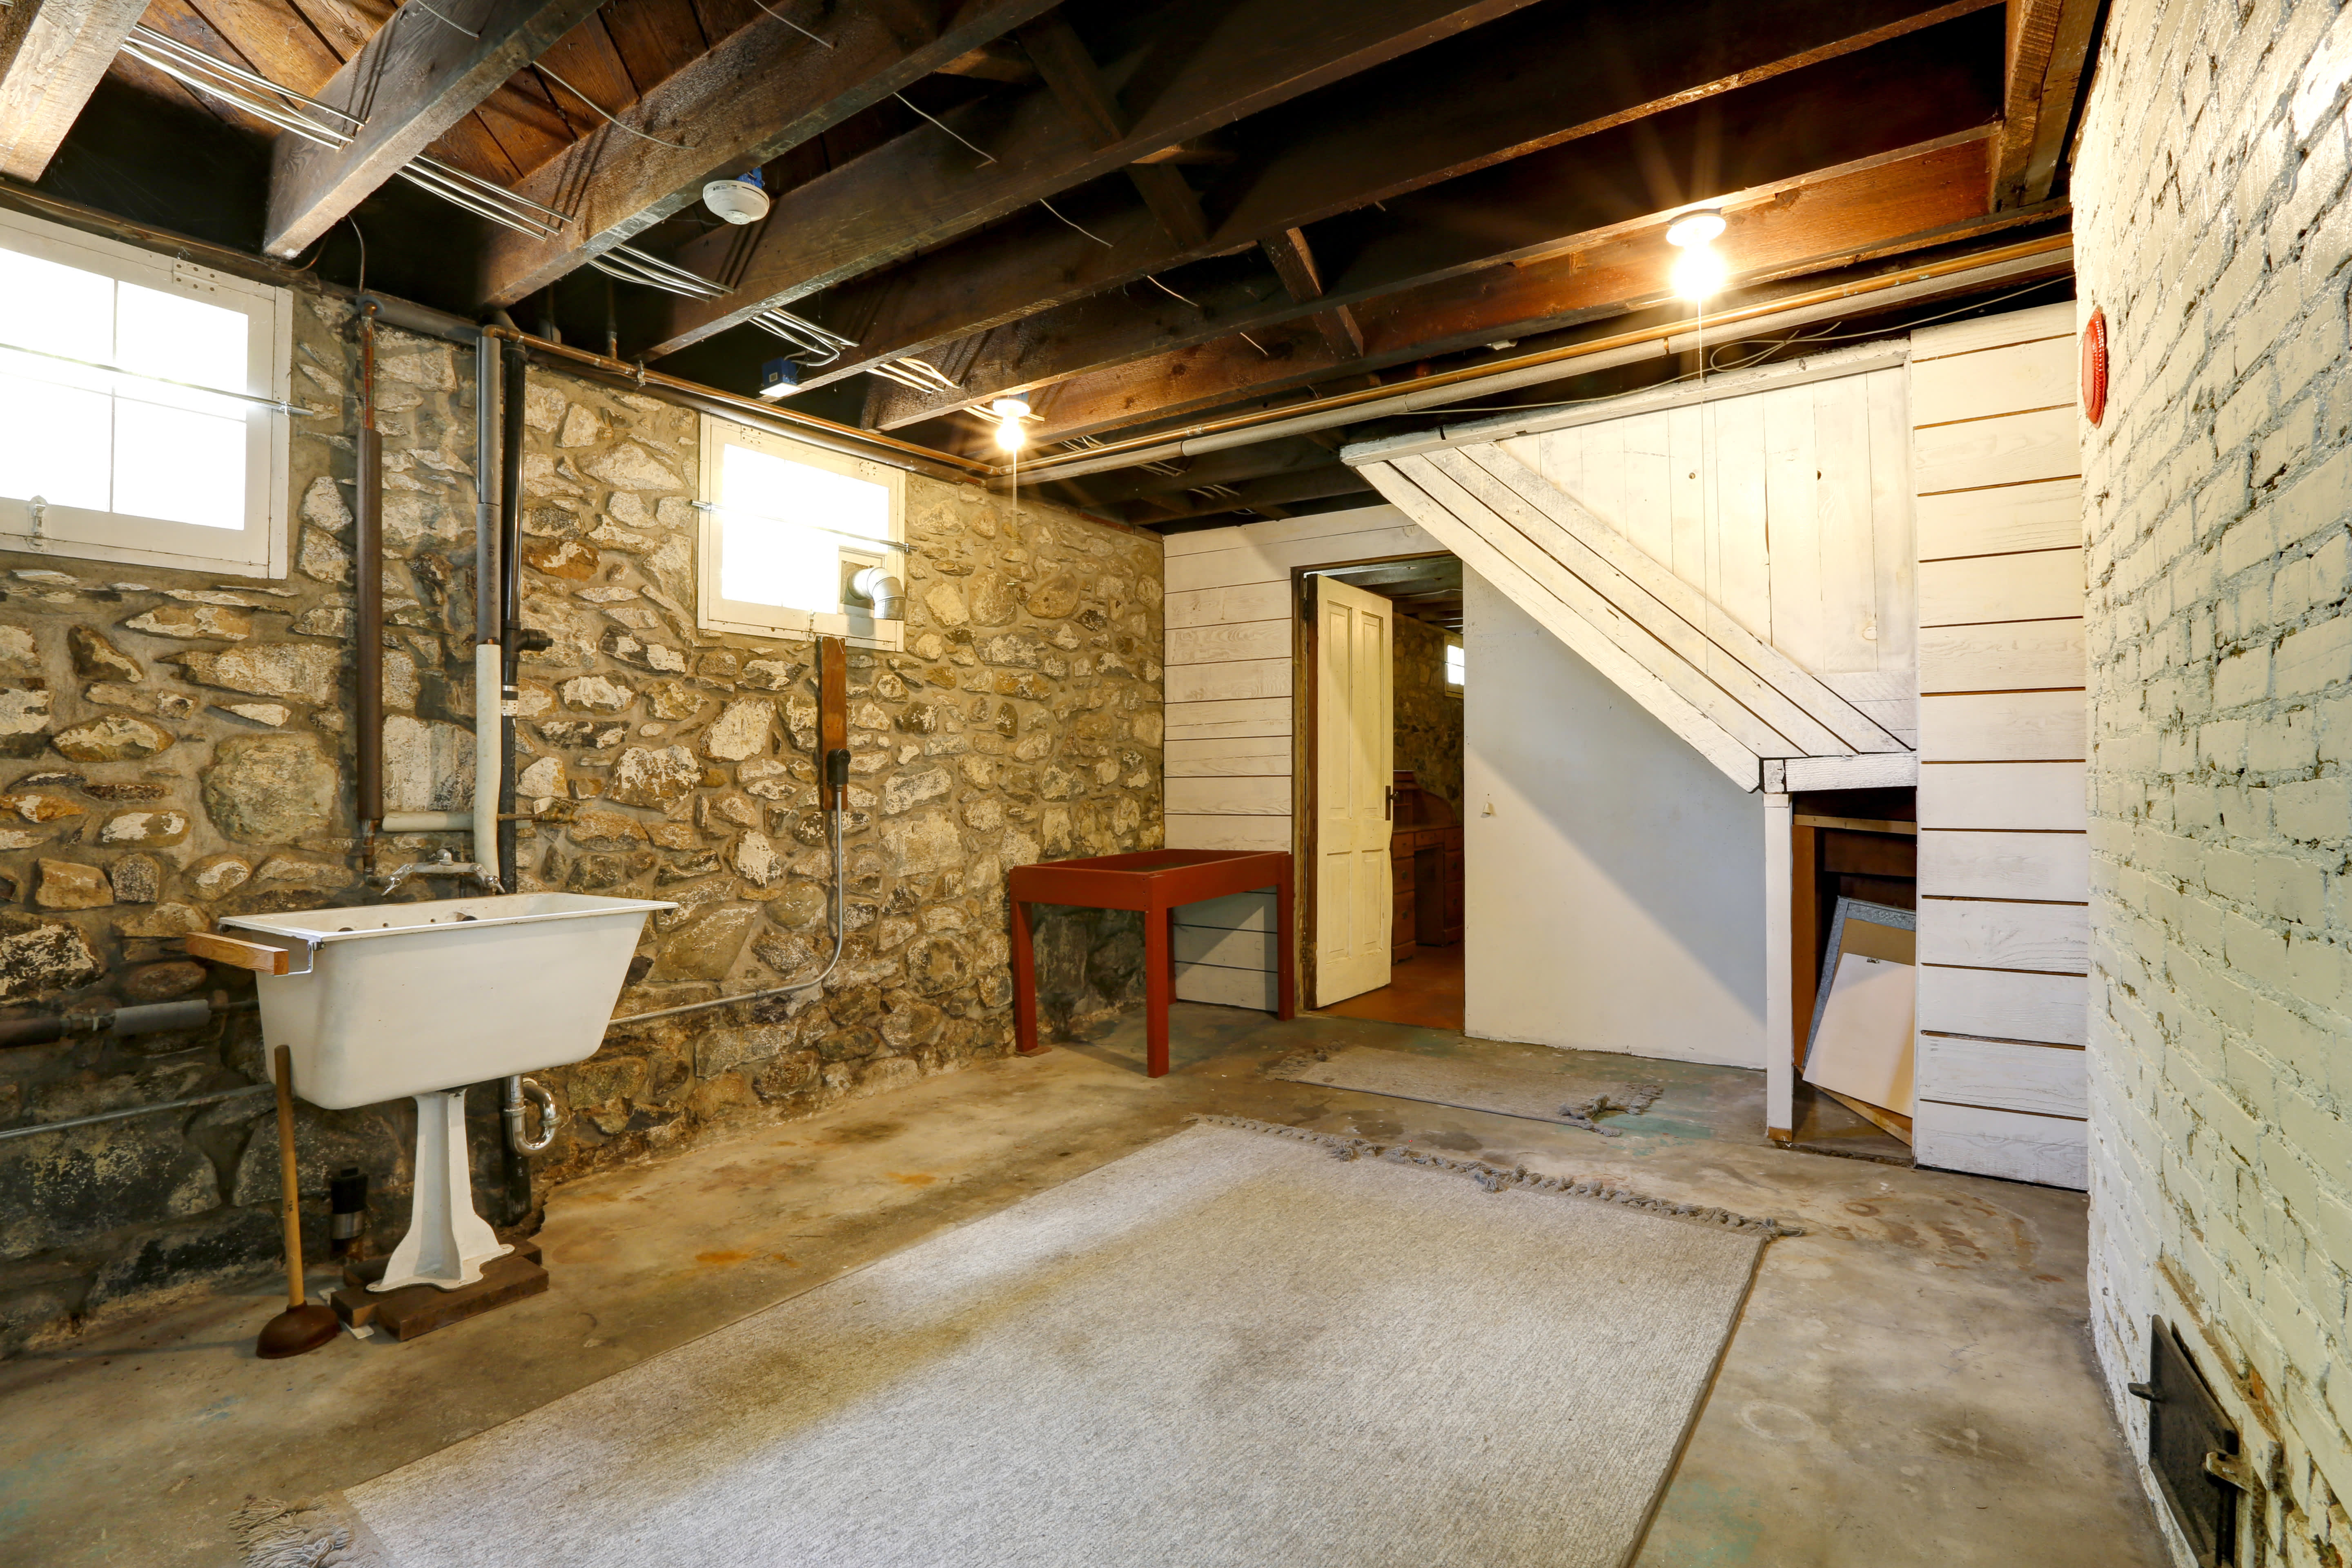 4 Reasons Basements Are Actually Beautiful, According to an Expert